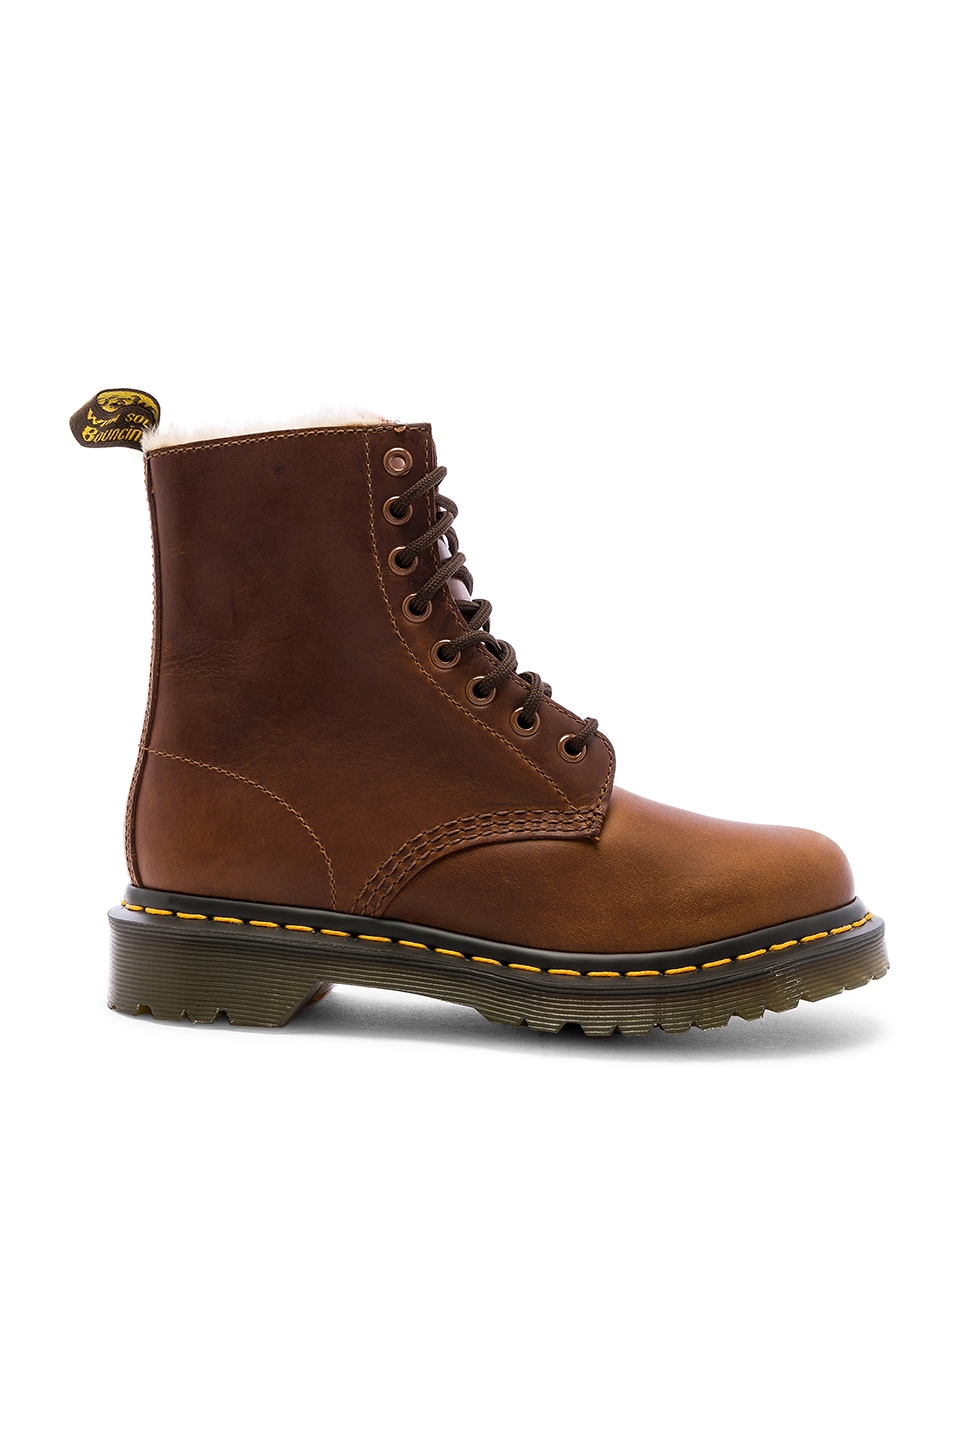 Dr. Martens 1460 Serena Faux Fur Lined Boot in Butterscotch | REVOLVE